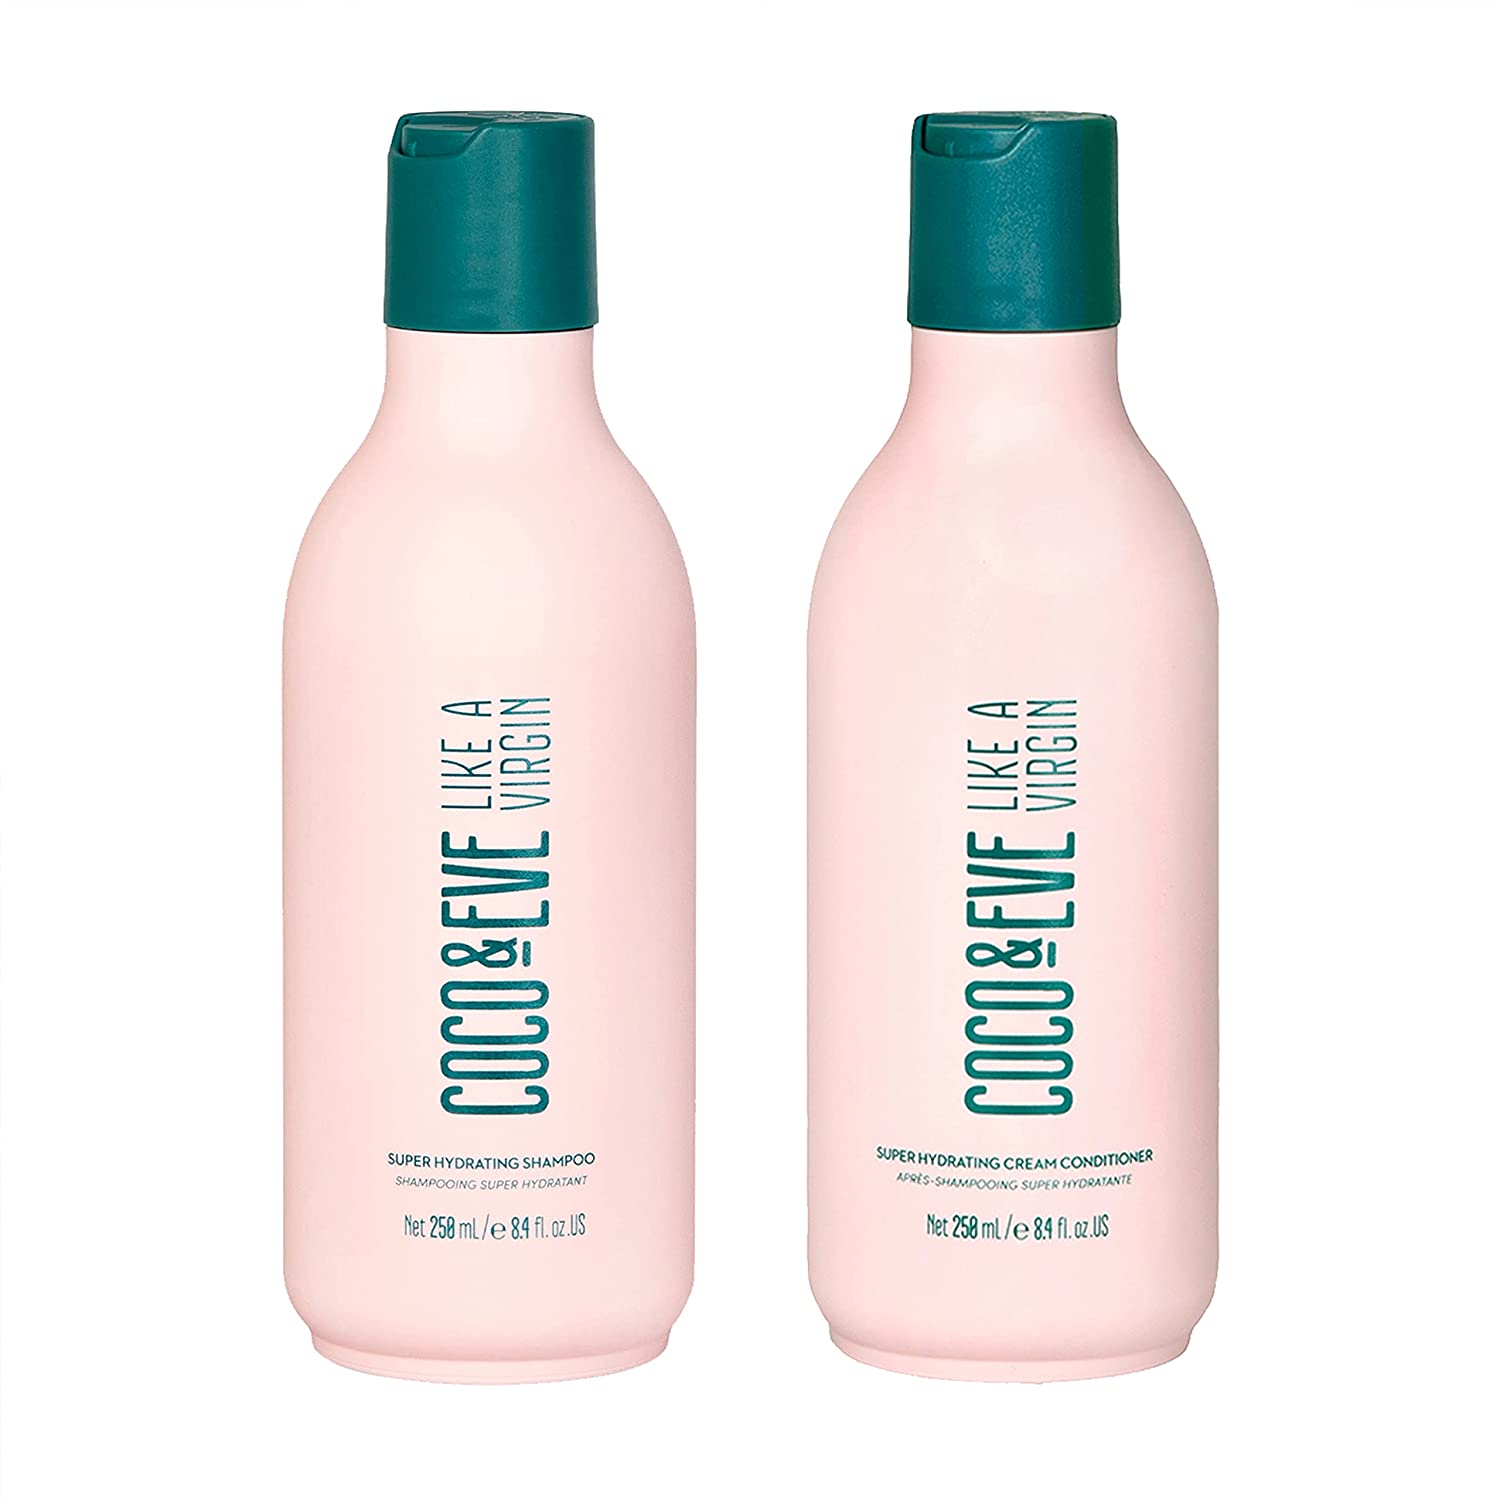 Coco & Eve Like A Virgin - Moisturising Shampoo & Conditioner - Natural Hair Care without Sulfates, with Argan, Coconut and Avocado Oil - for Dry, Damaged & Coloured Hair - 250 ml